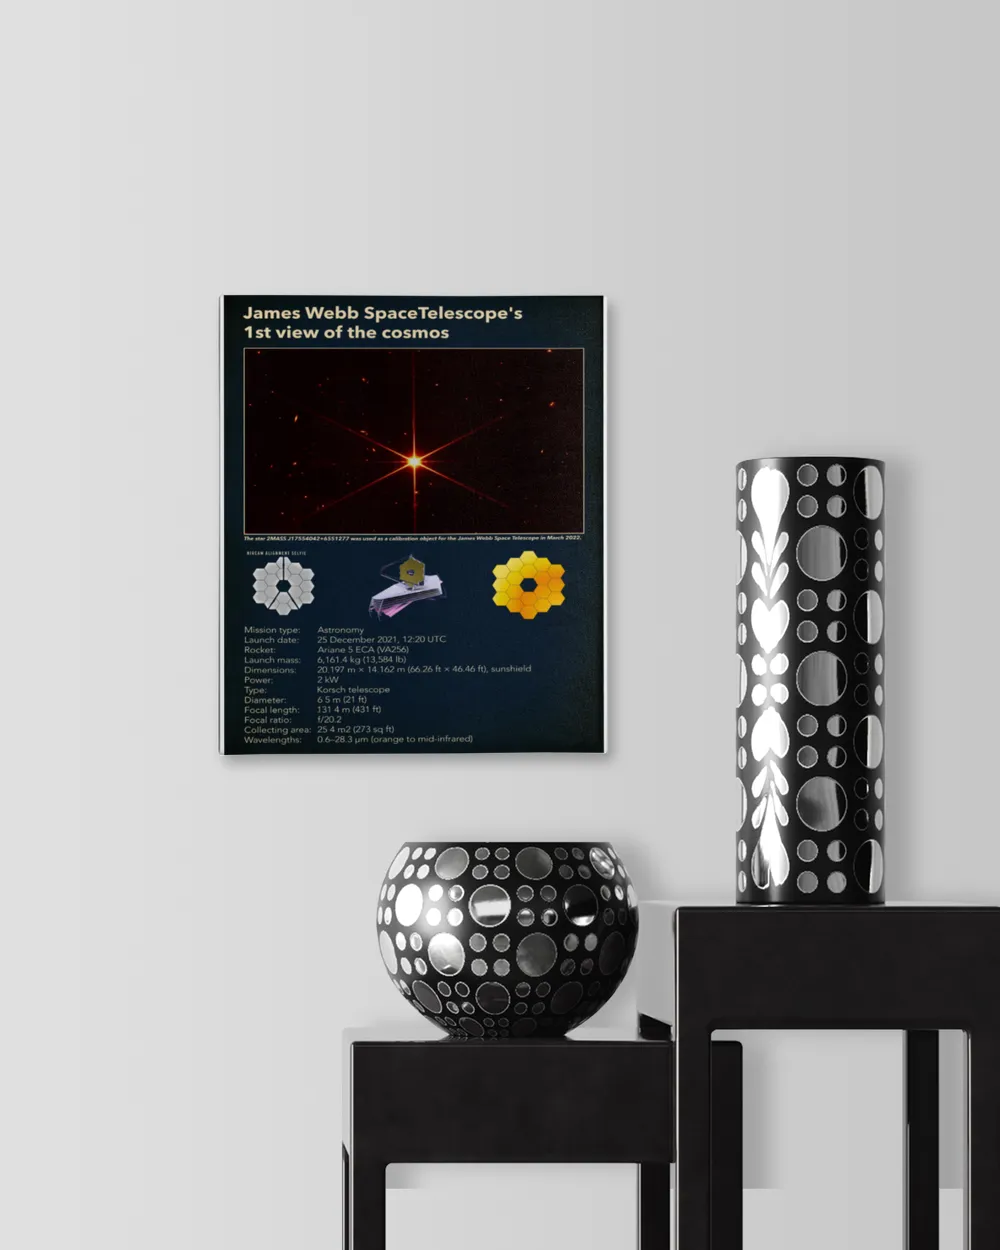 Space Telescope Vintage Poster,james Webb Space Telescope 1st Image, Space Wall Art Decor